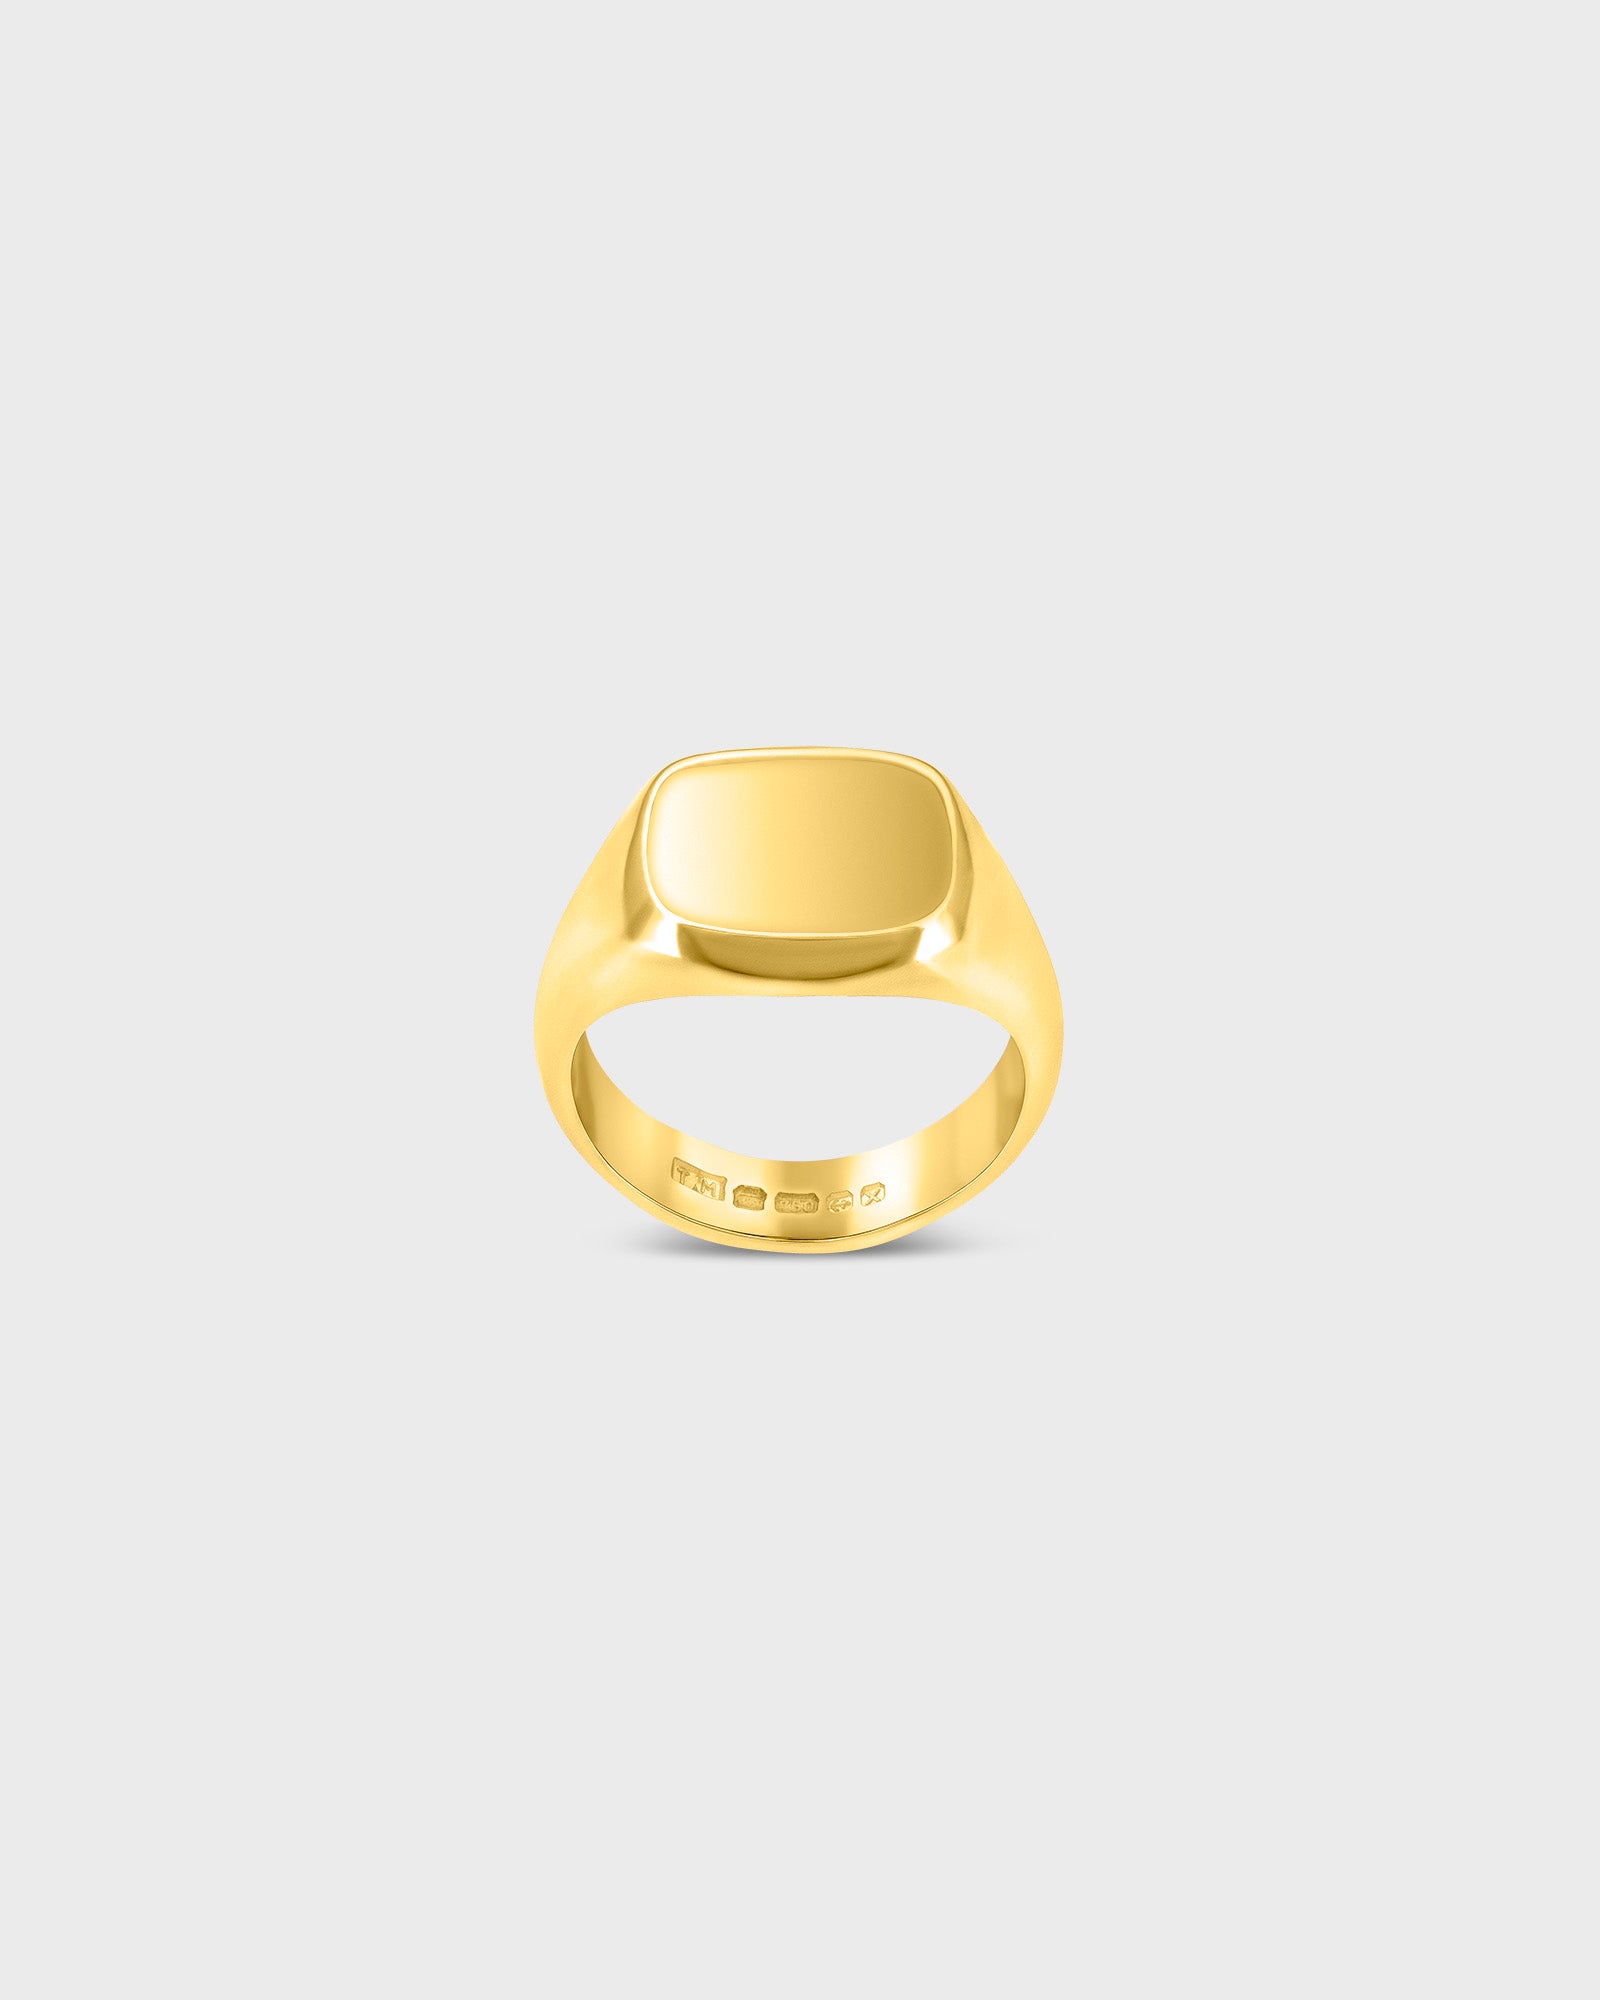 Minimal Square Signet Ring in 9k Yellow Gold by Wilson Grant